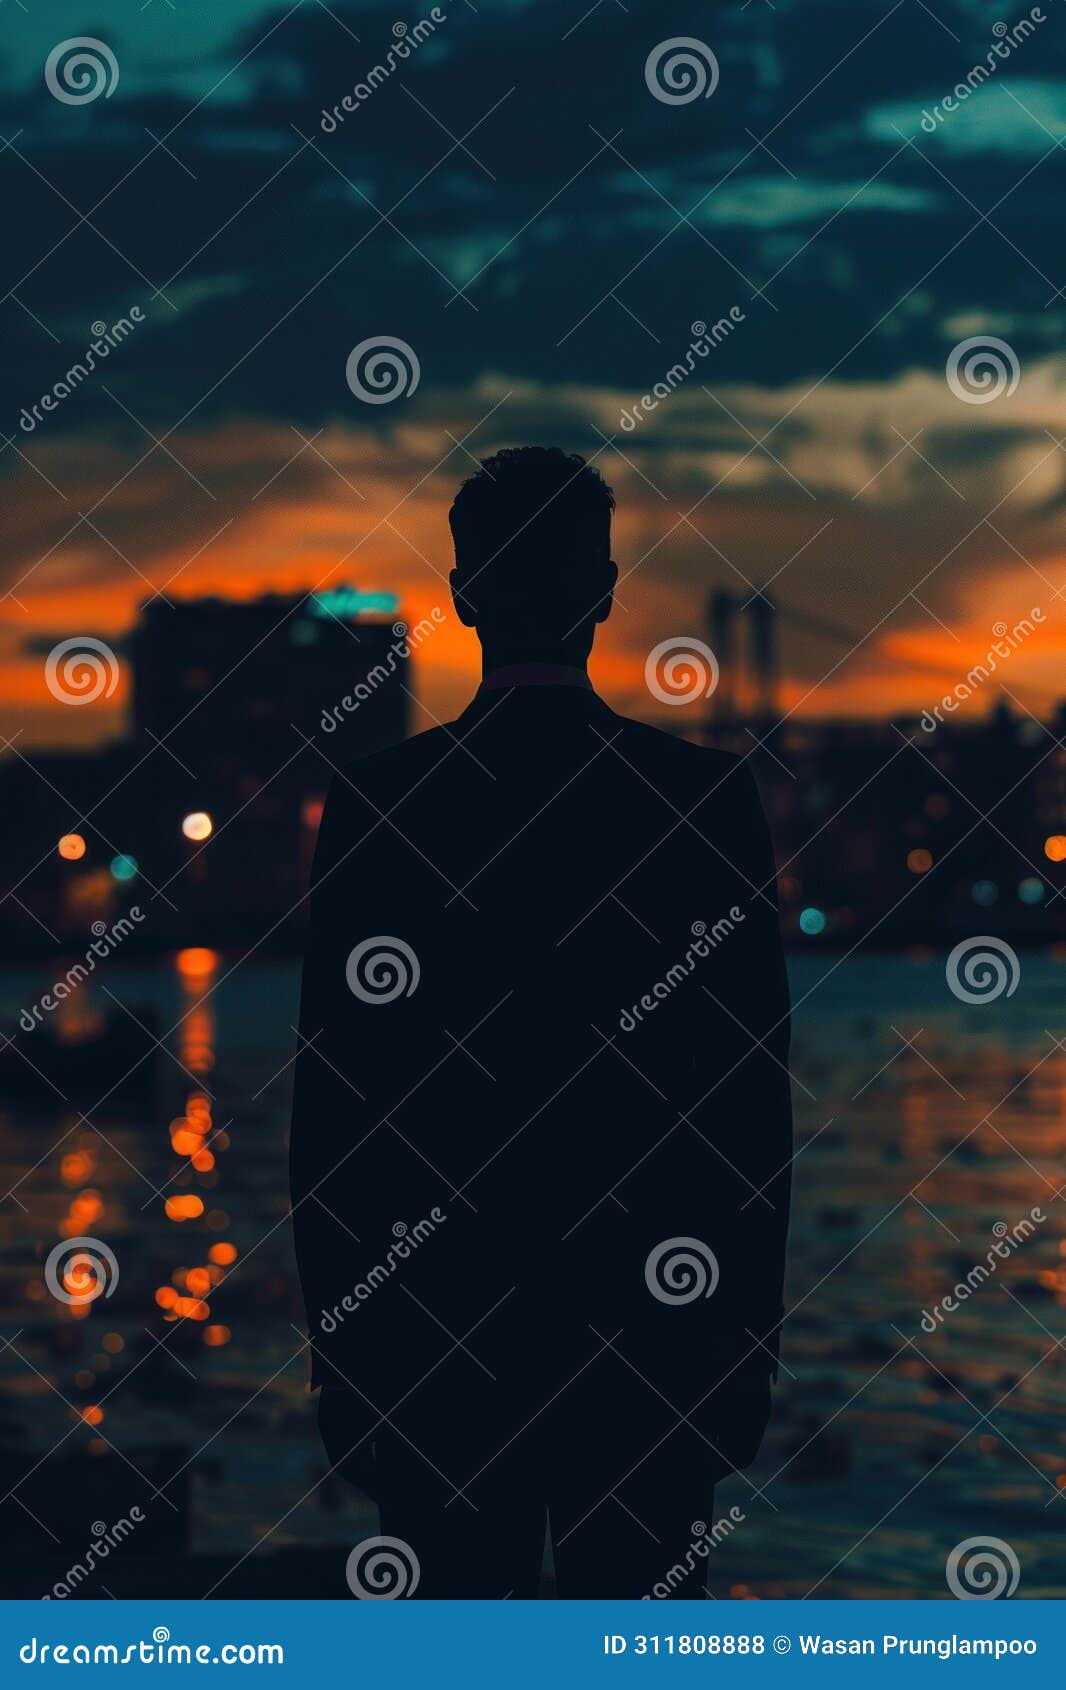 dark figure of a man in suit, sunset quay, silent yearning , 8k resolution